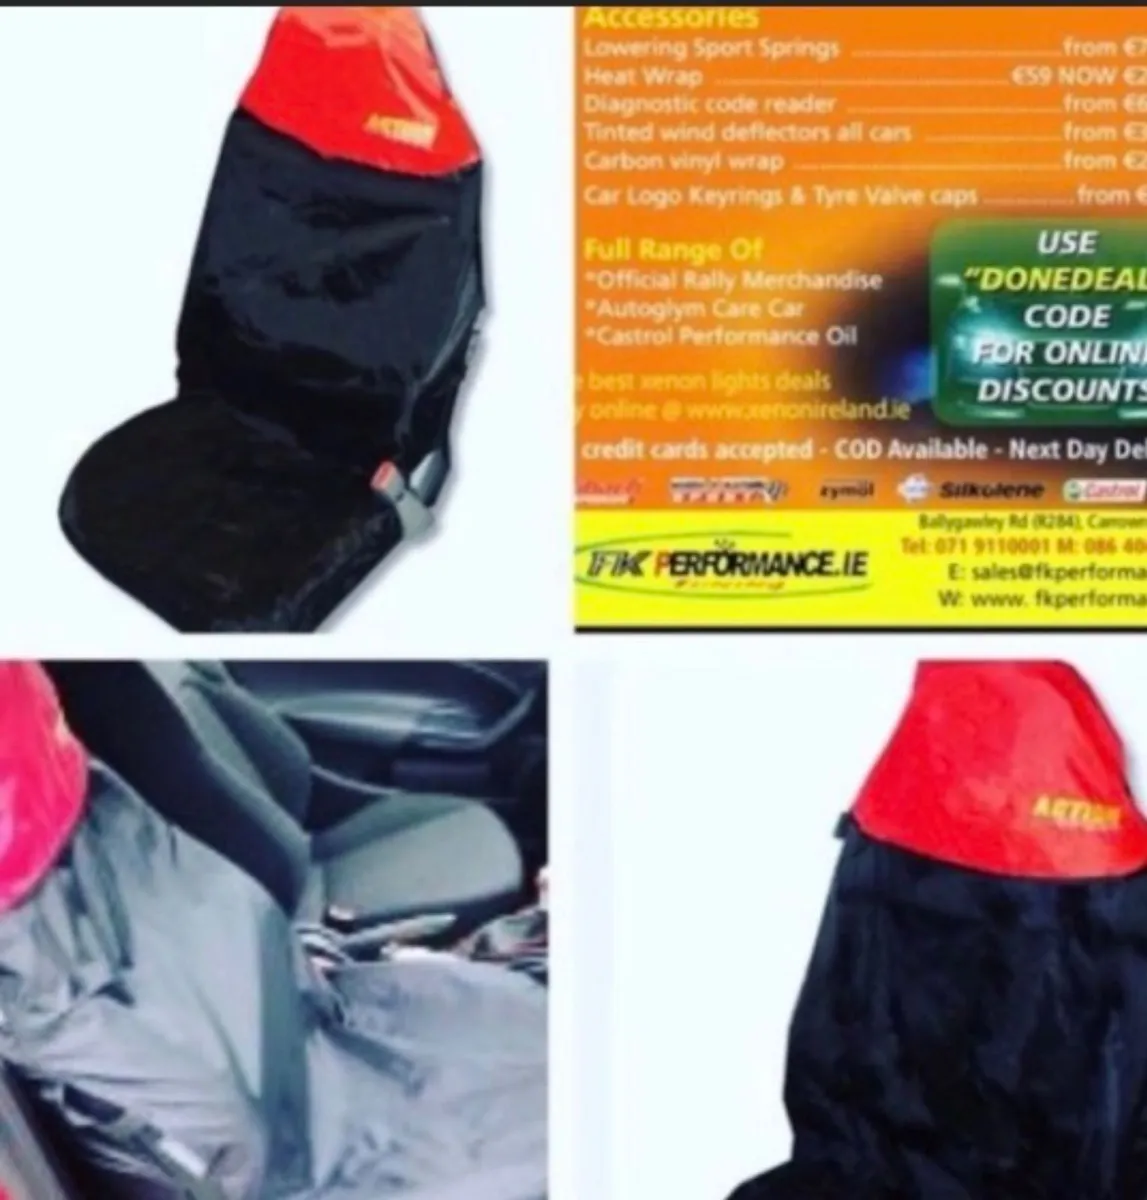 Action sport seat covers